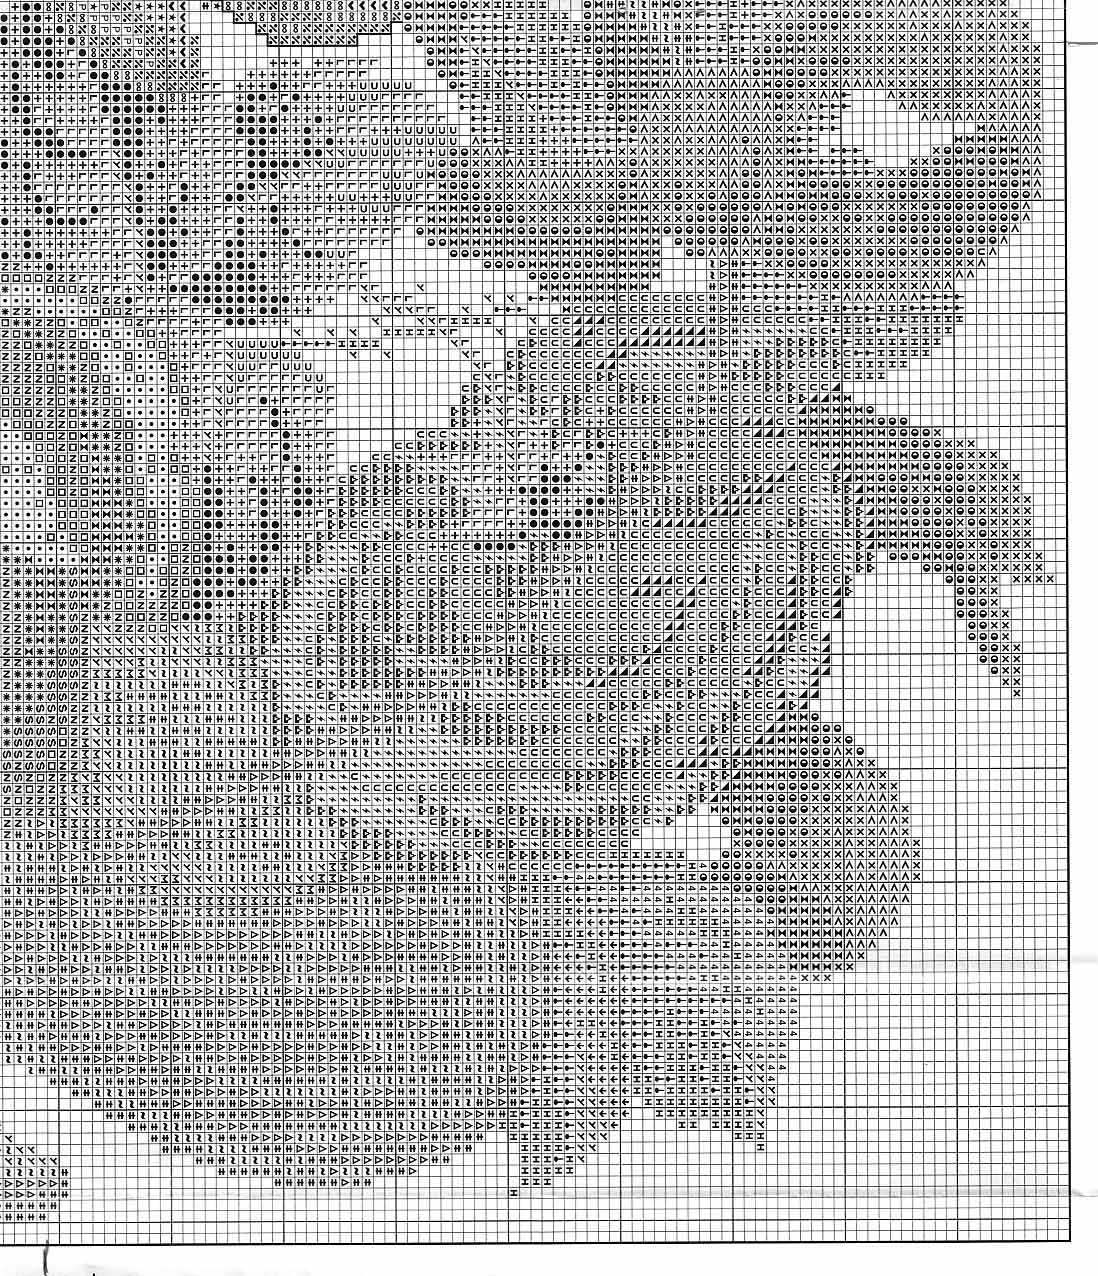 Bouquet of roses cross stitch pattern (6)